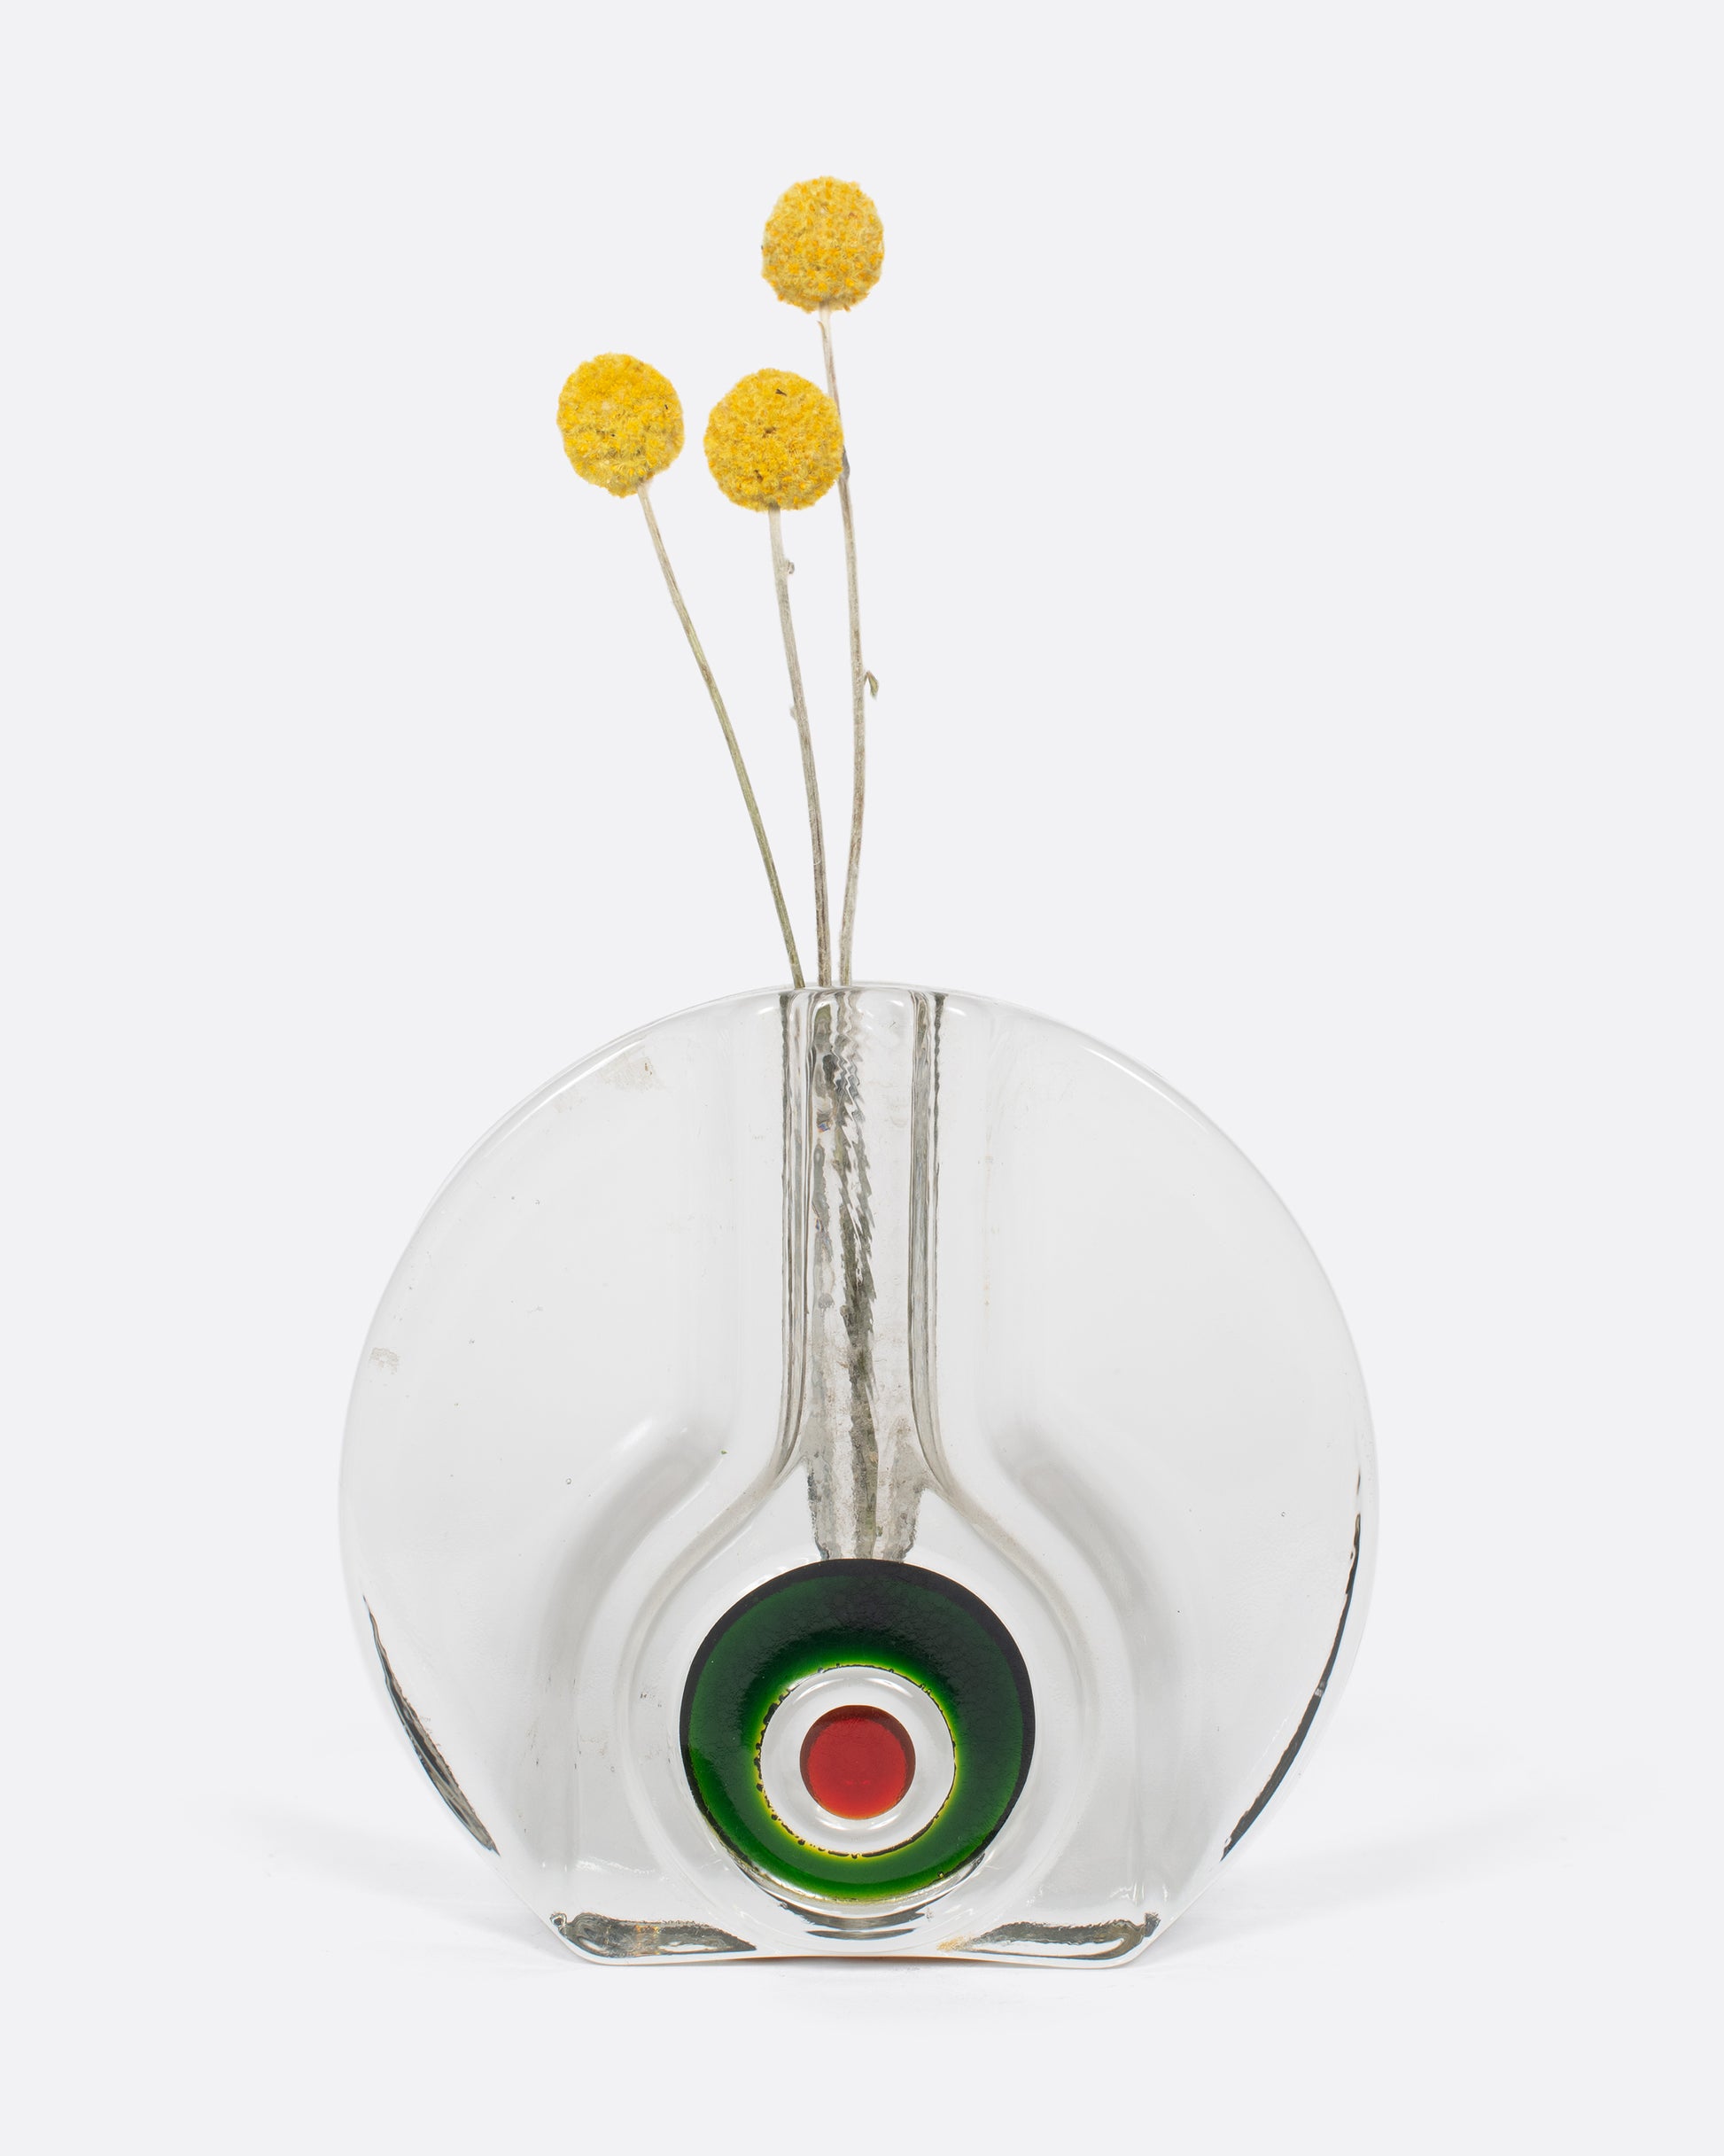 A unique vintage German glass crystal , flattened round bud vase, with a red and green bullseye that resembles a seed growing.